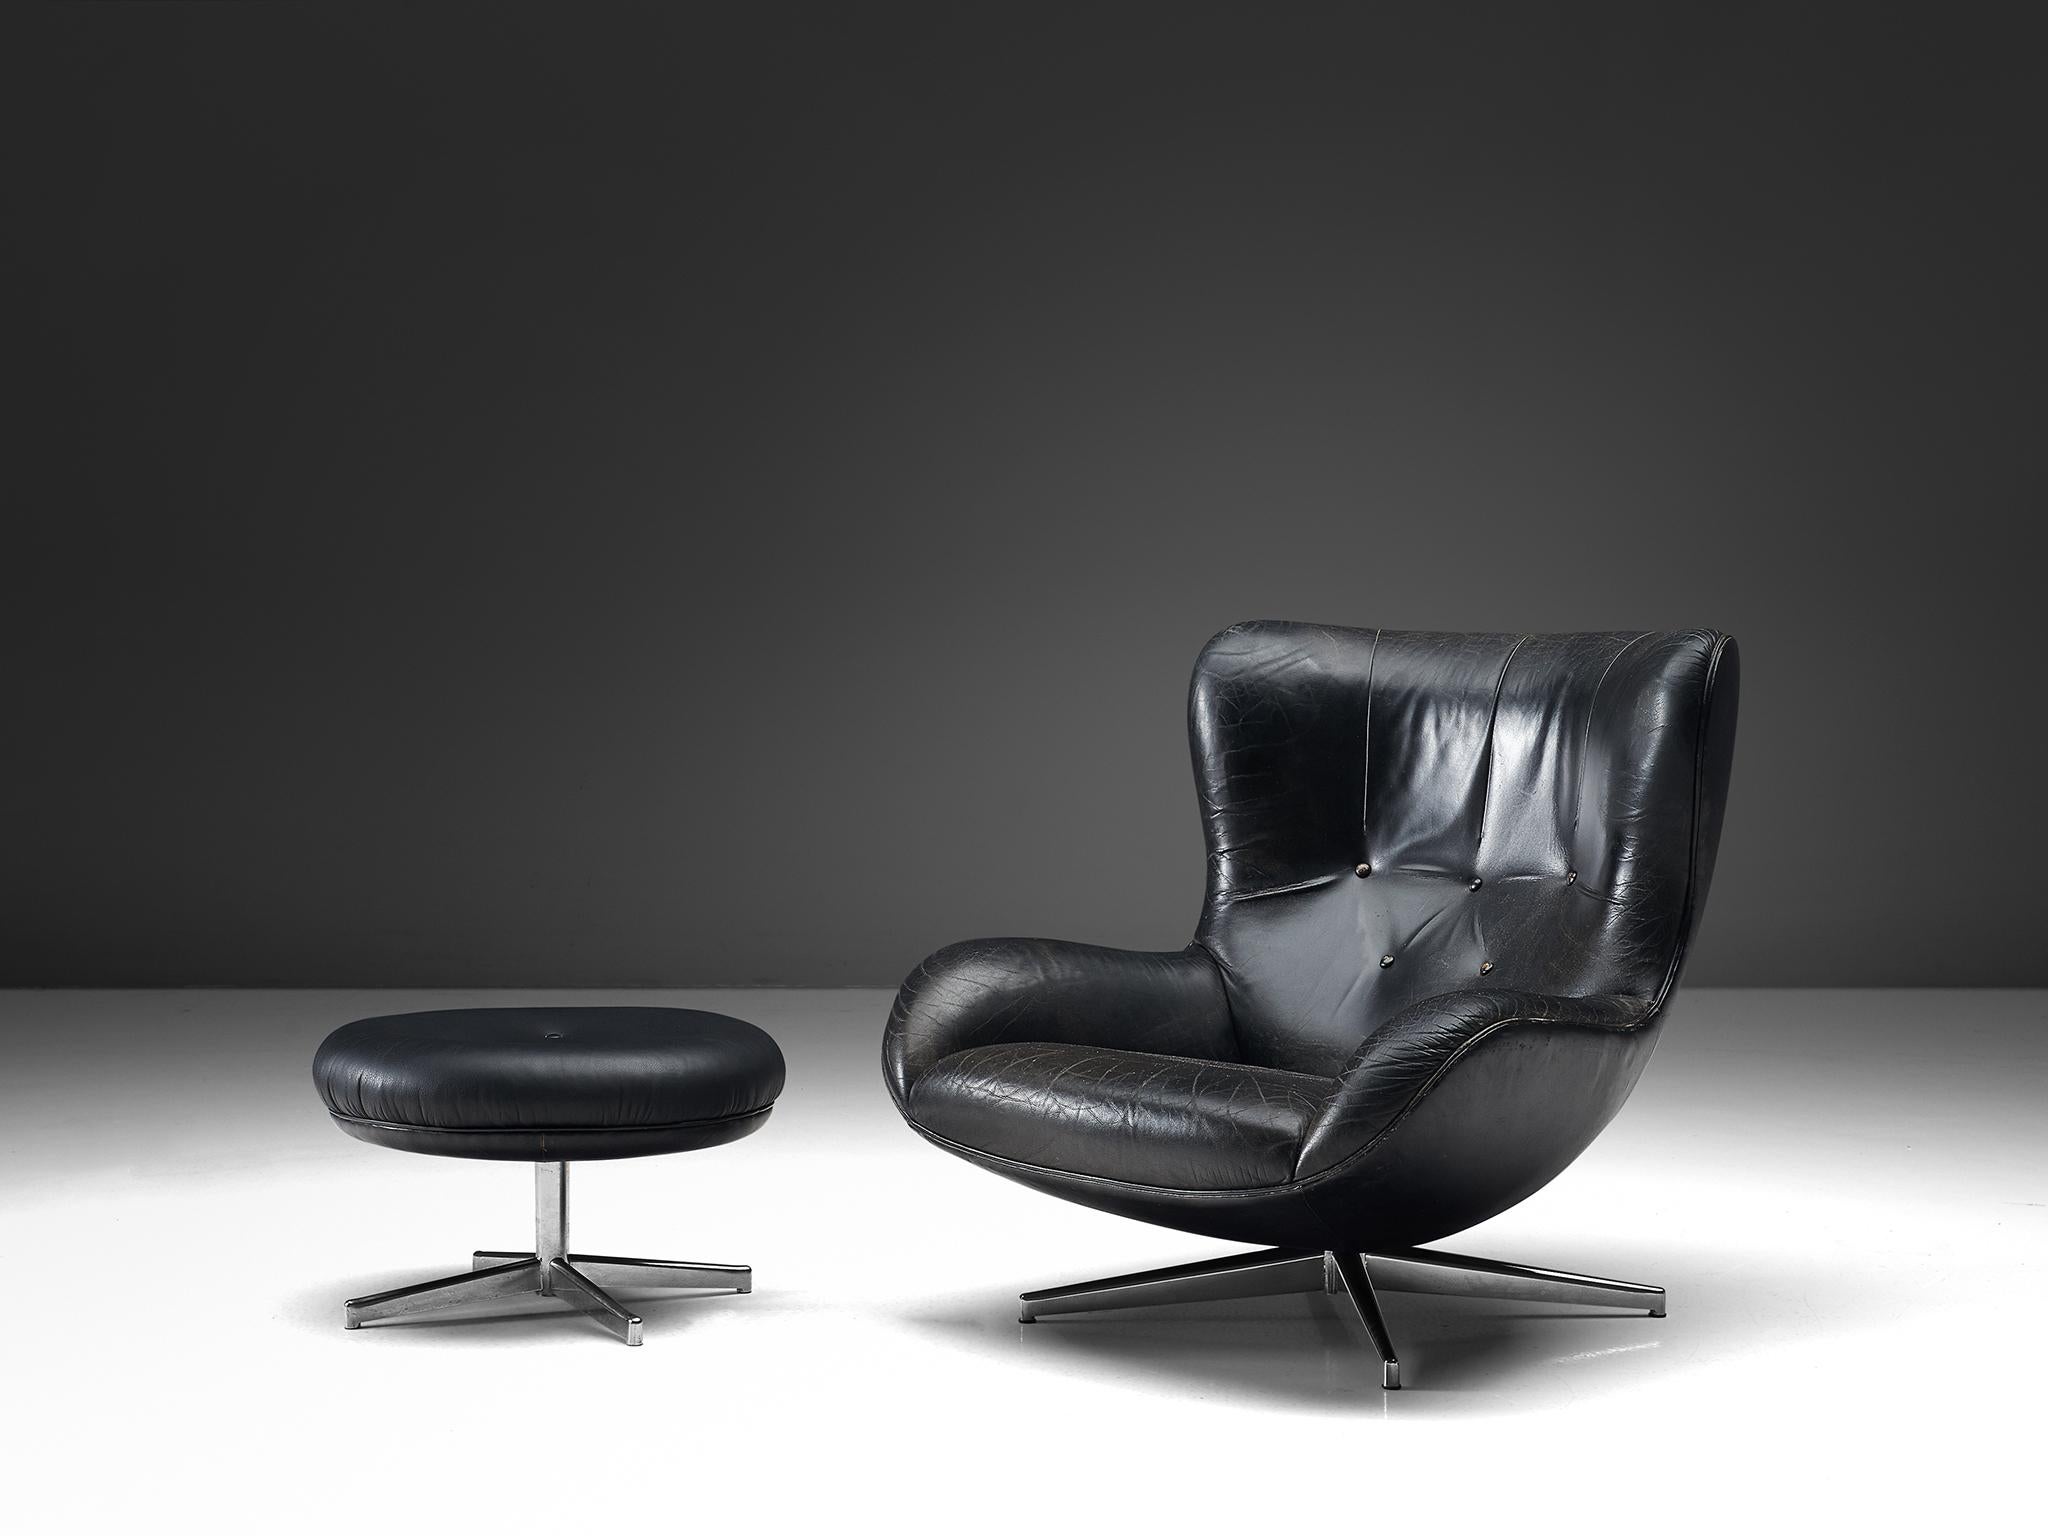 Illum Wikkelsø for A. Mikael Laursen, swivel lounge chair with ottoman model ML214, black leather and metal, Denmark, 1960s.

Organic shaped easy chair in patinated black leather by Danish designer Illum Wikkelsø. This swivel chair shows some nice